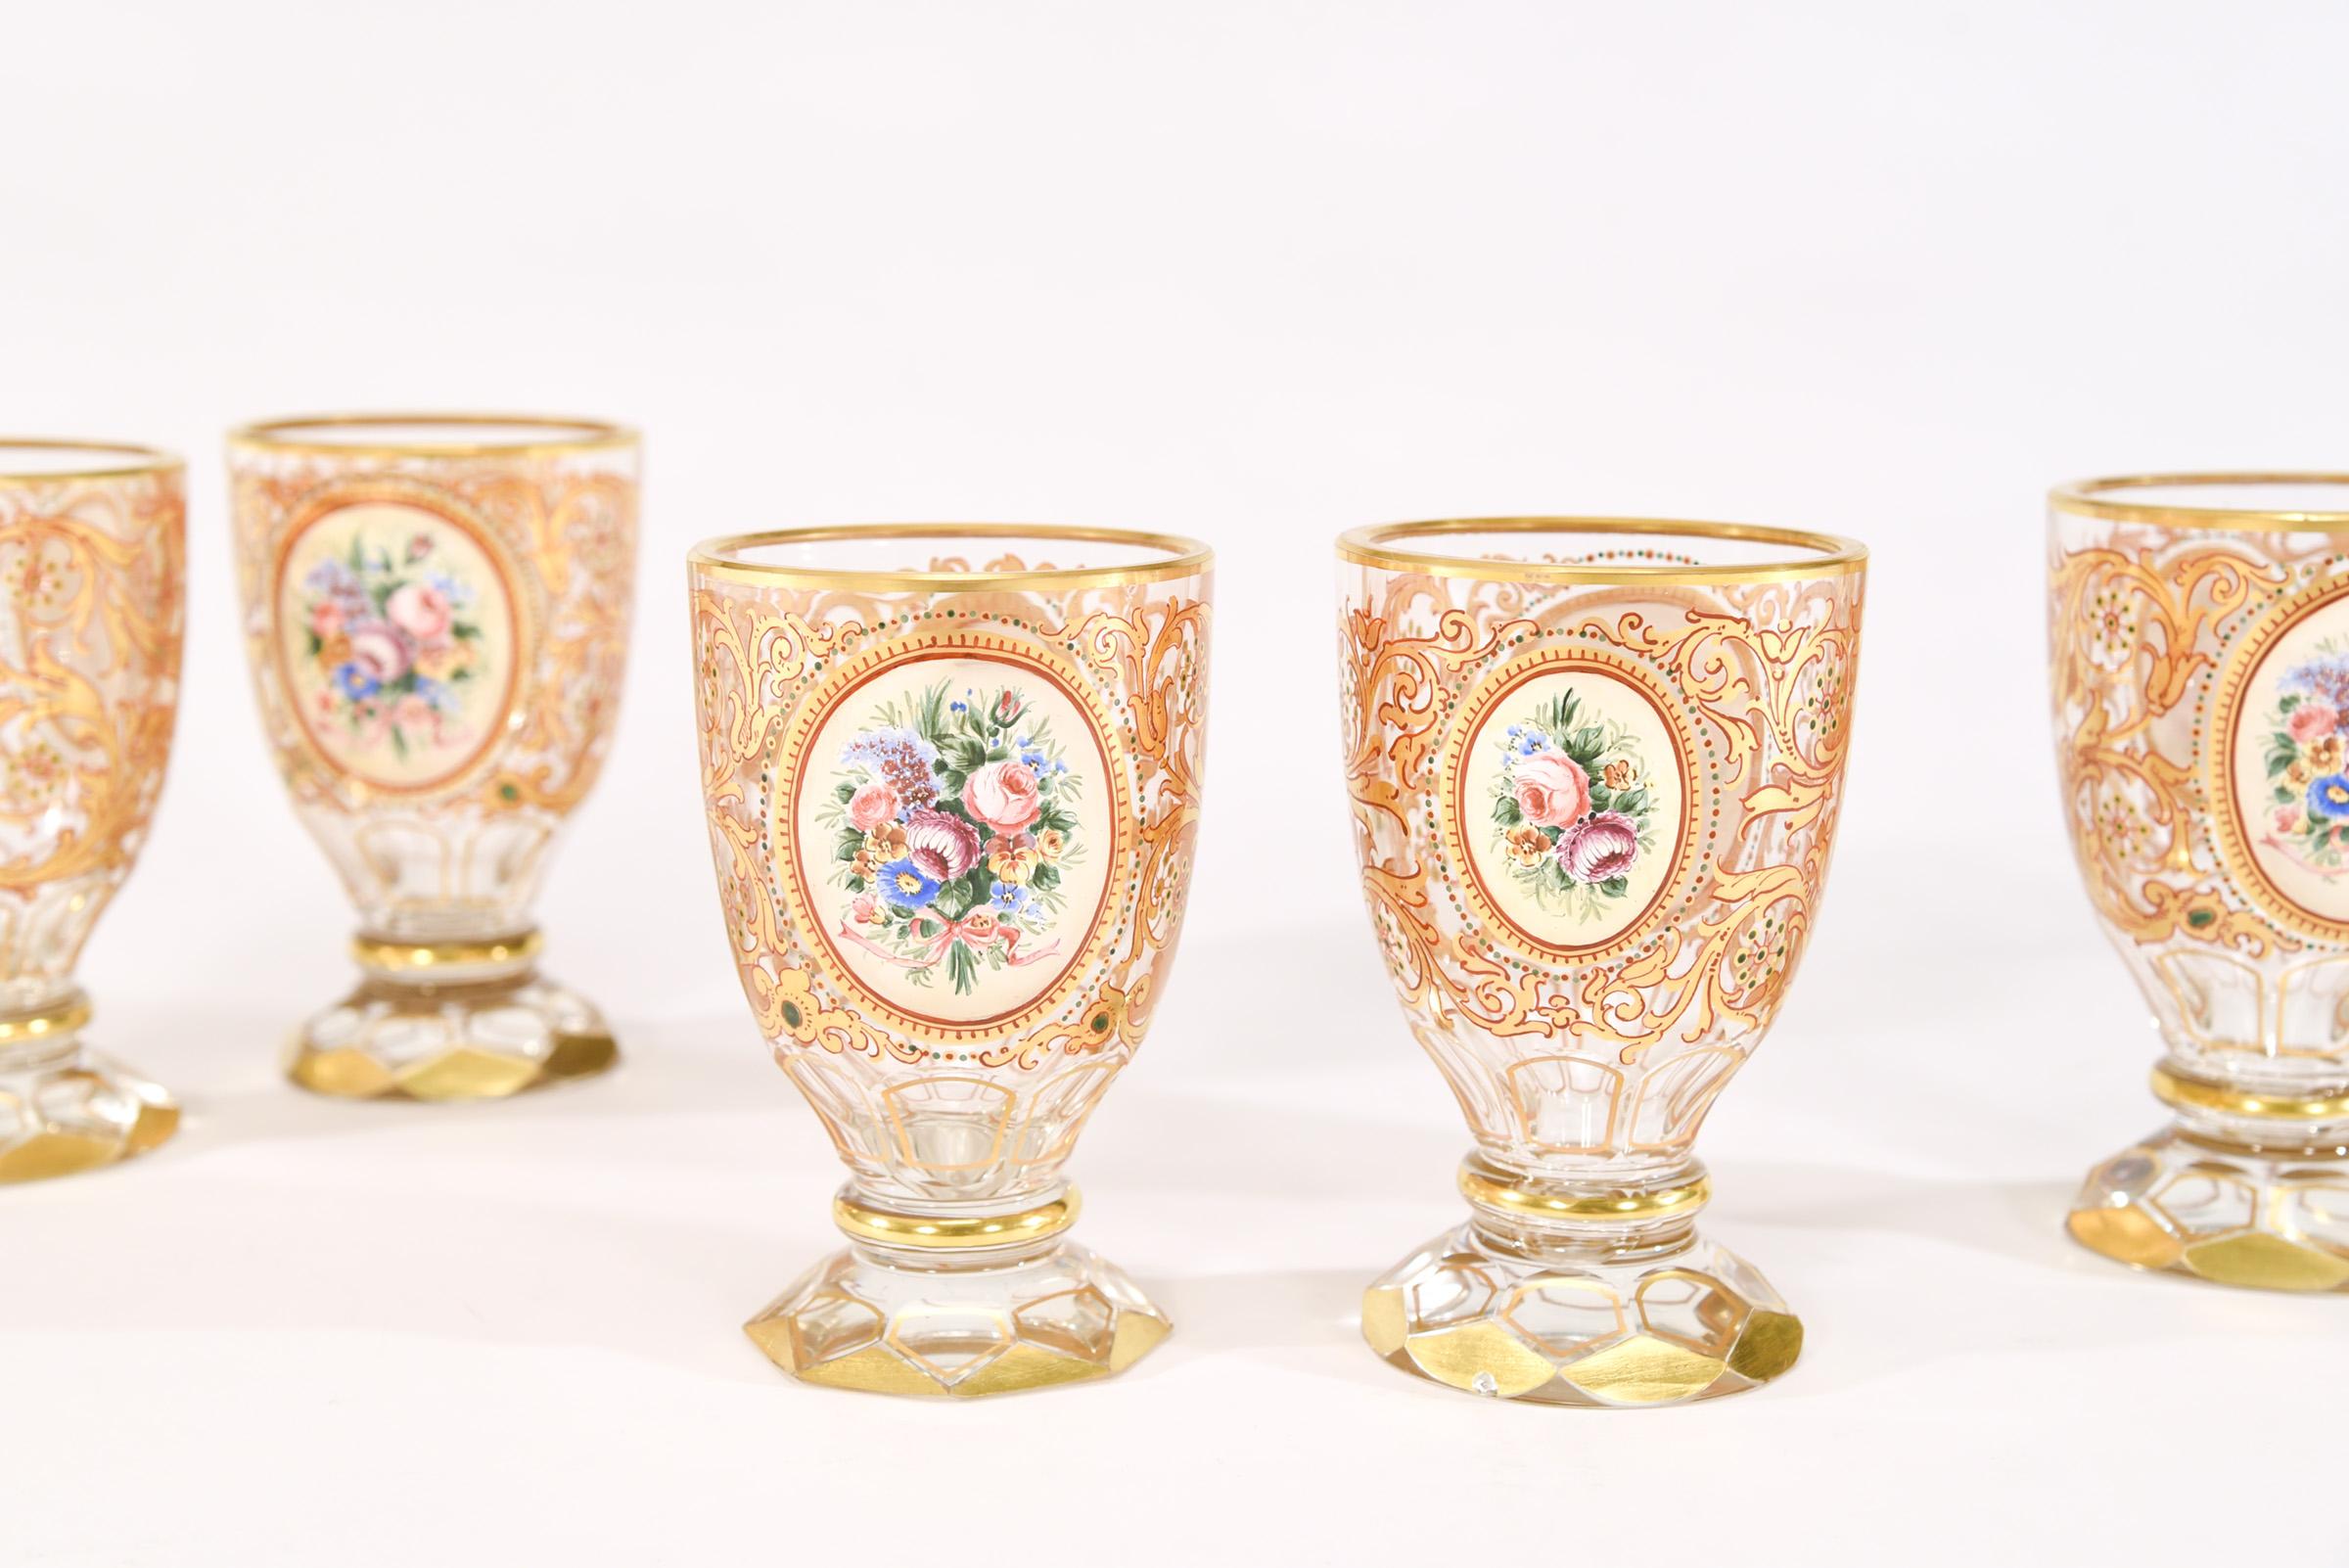 European 12 Bohemian 19th Century Crystal Tumblers with Polychrome Enamel Reserves Gold For Sale